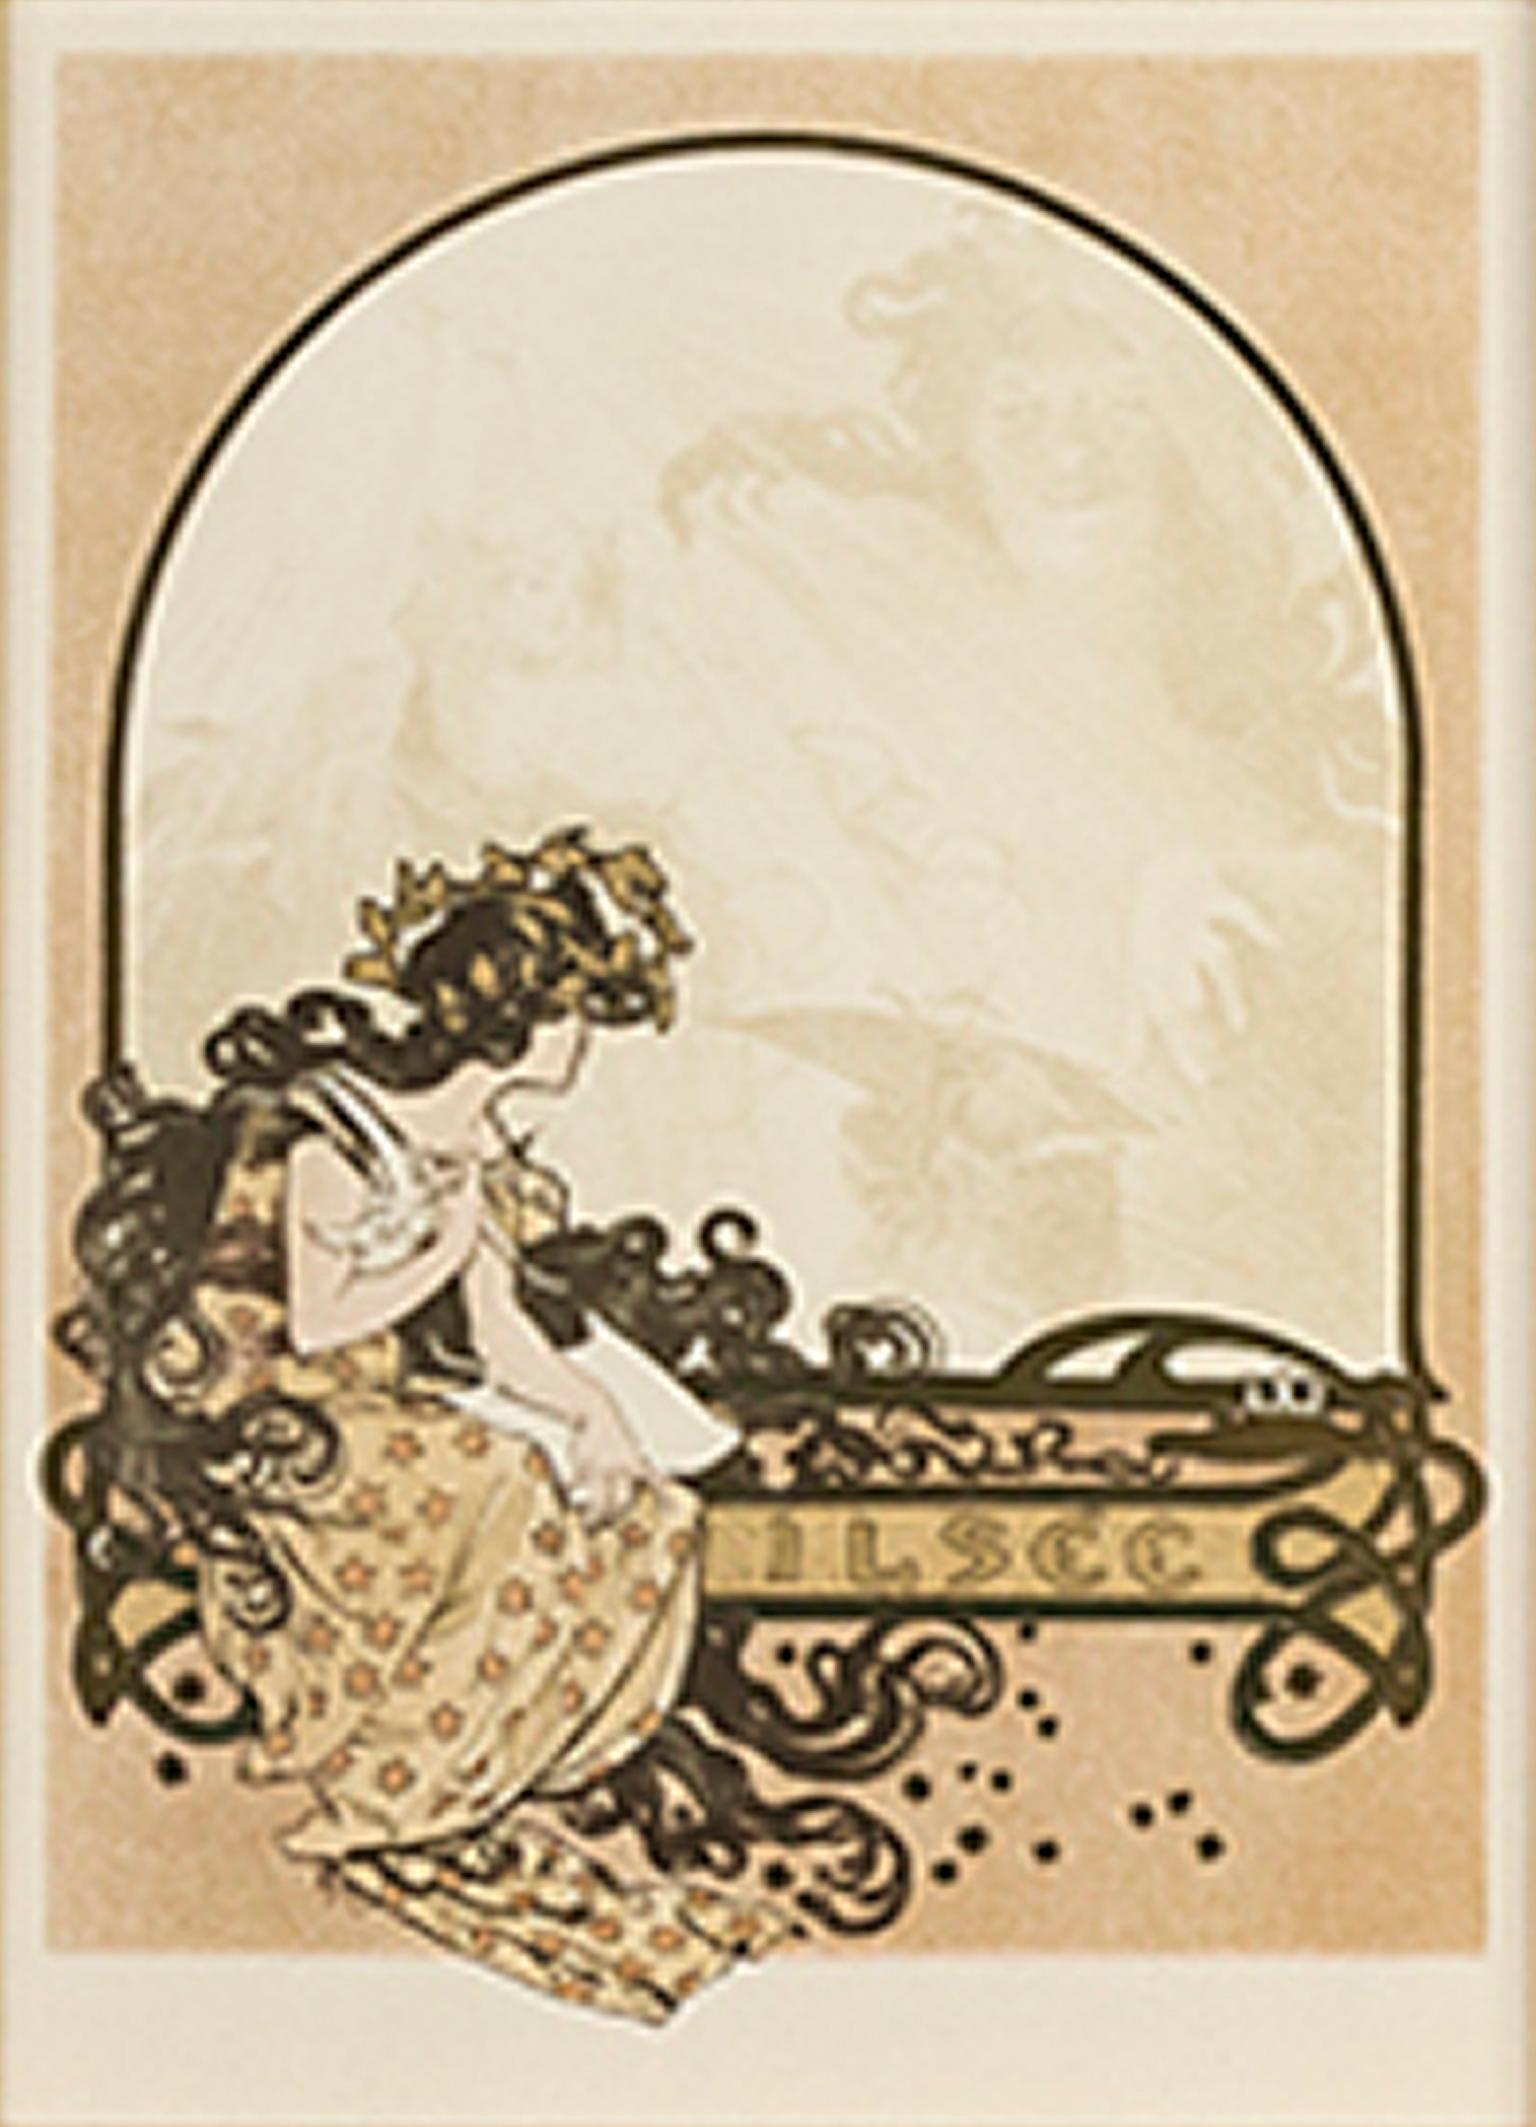 From: Ilsée, Princess of Tripoli Ilsee's Vision, Color Lithograph by A. Mucha - Print by Alphonse Mucha